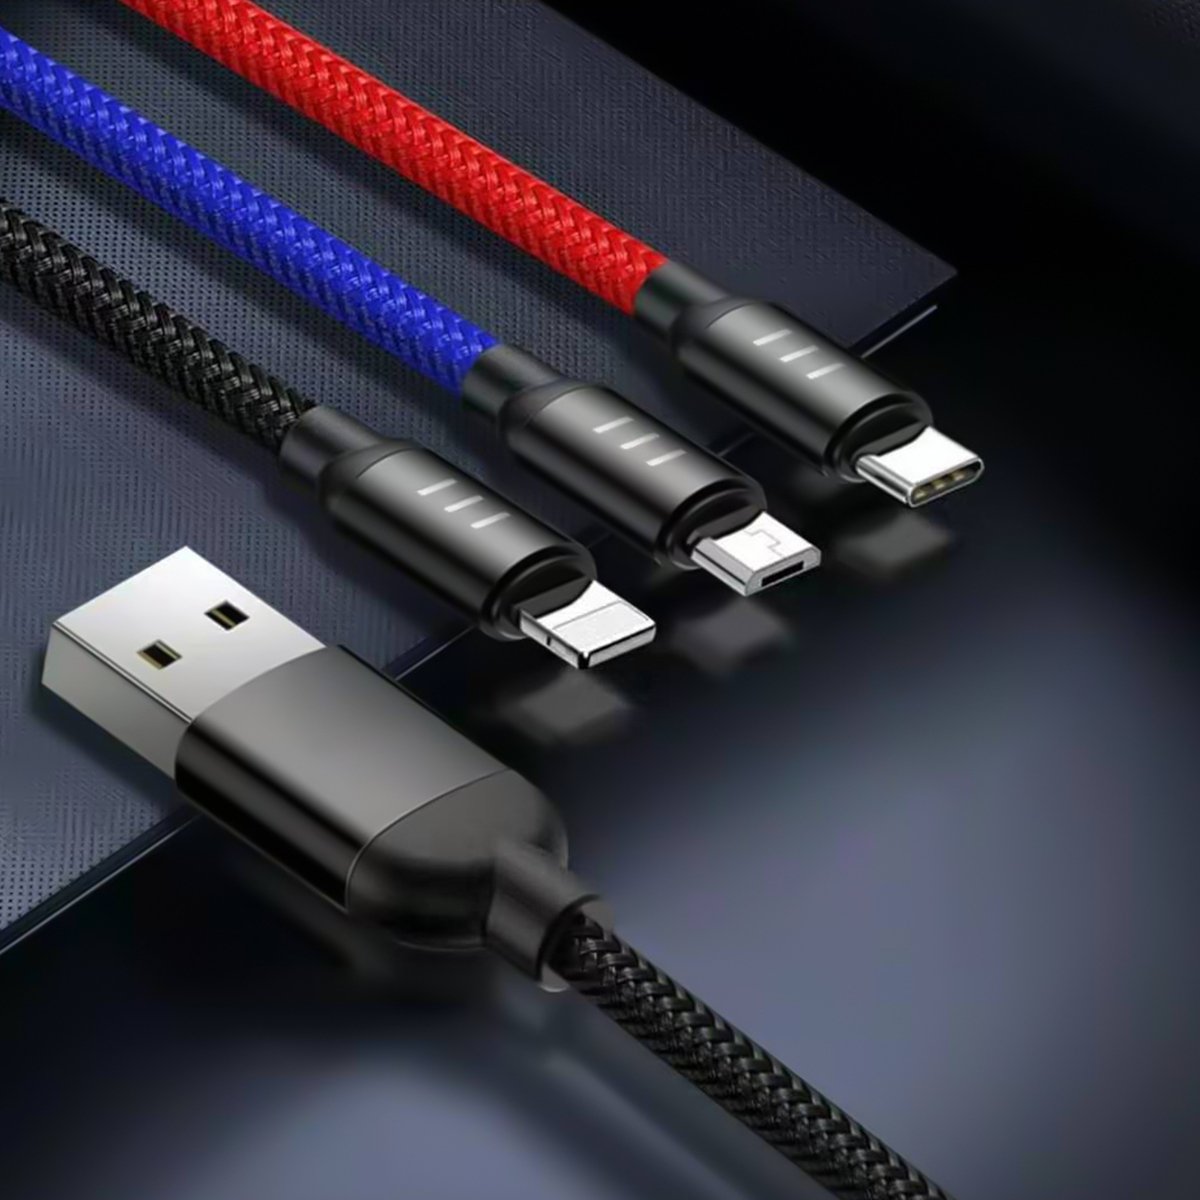 Trands Multi Colored 3 In 1 USB Cable With Lightning Micro USB Type C Connectors 1.2 Meter CA8816